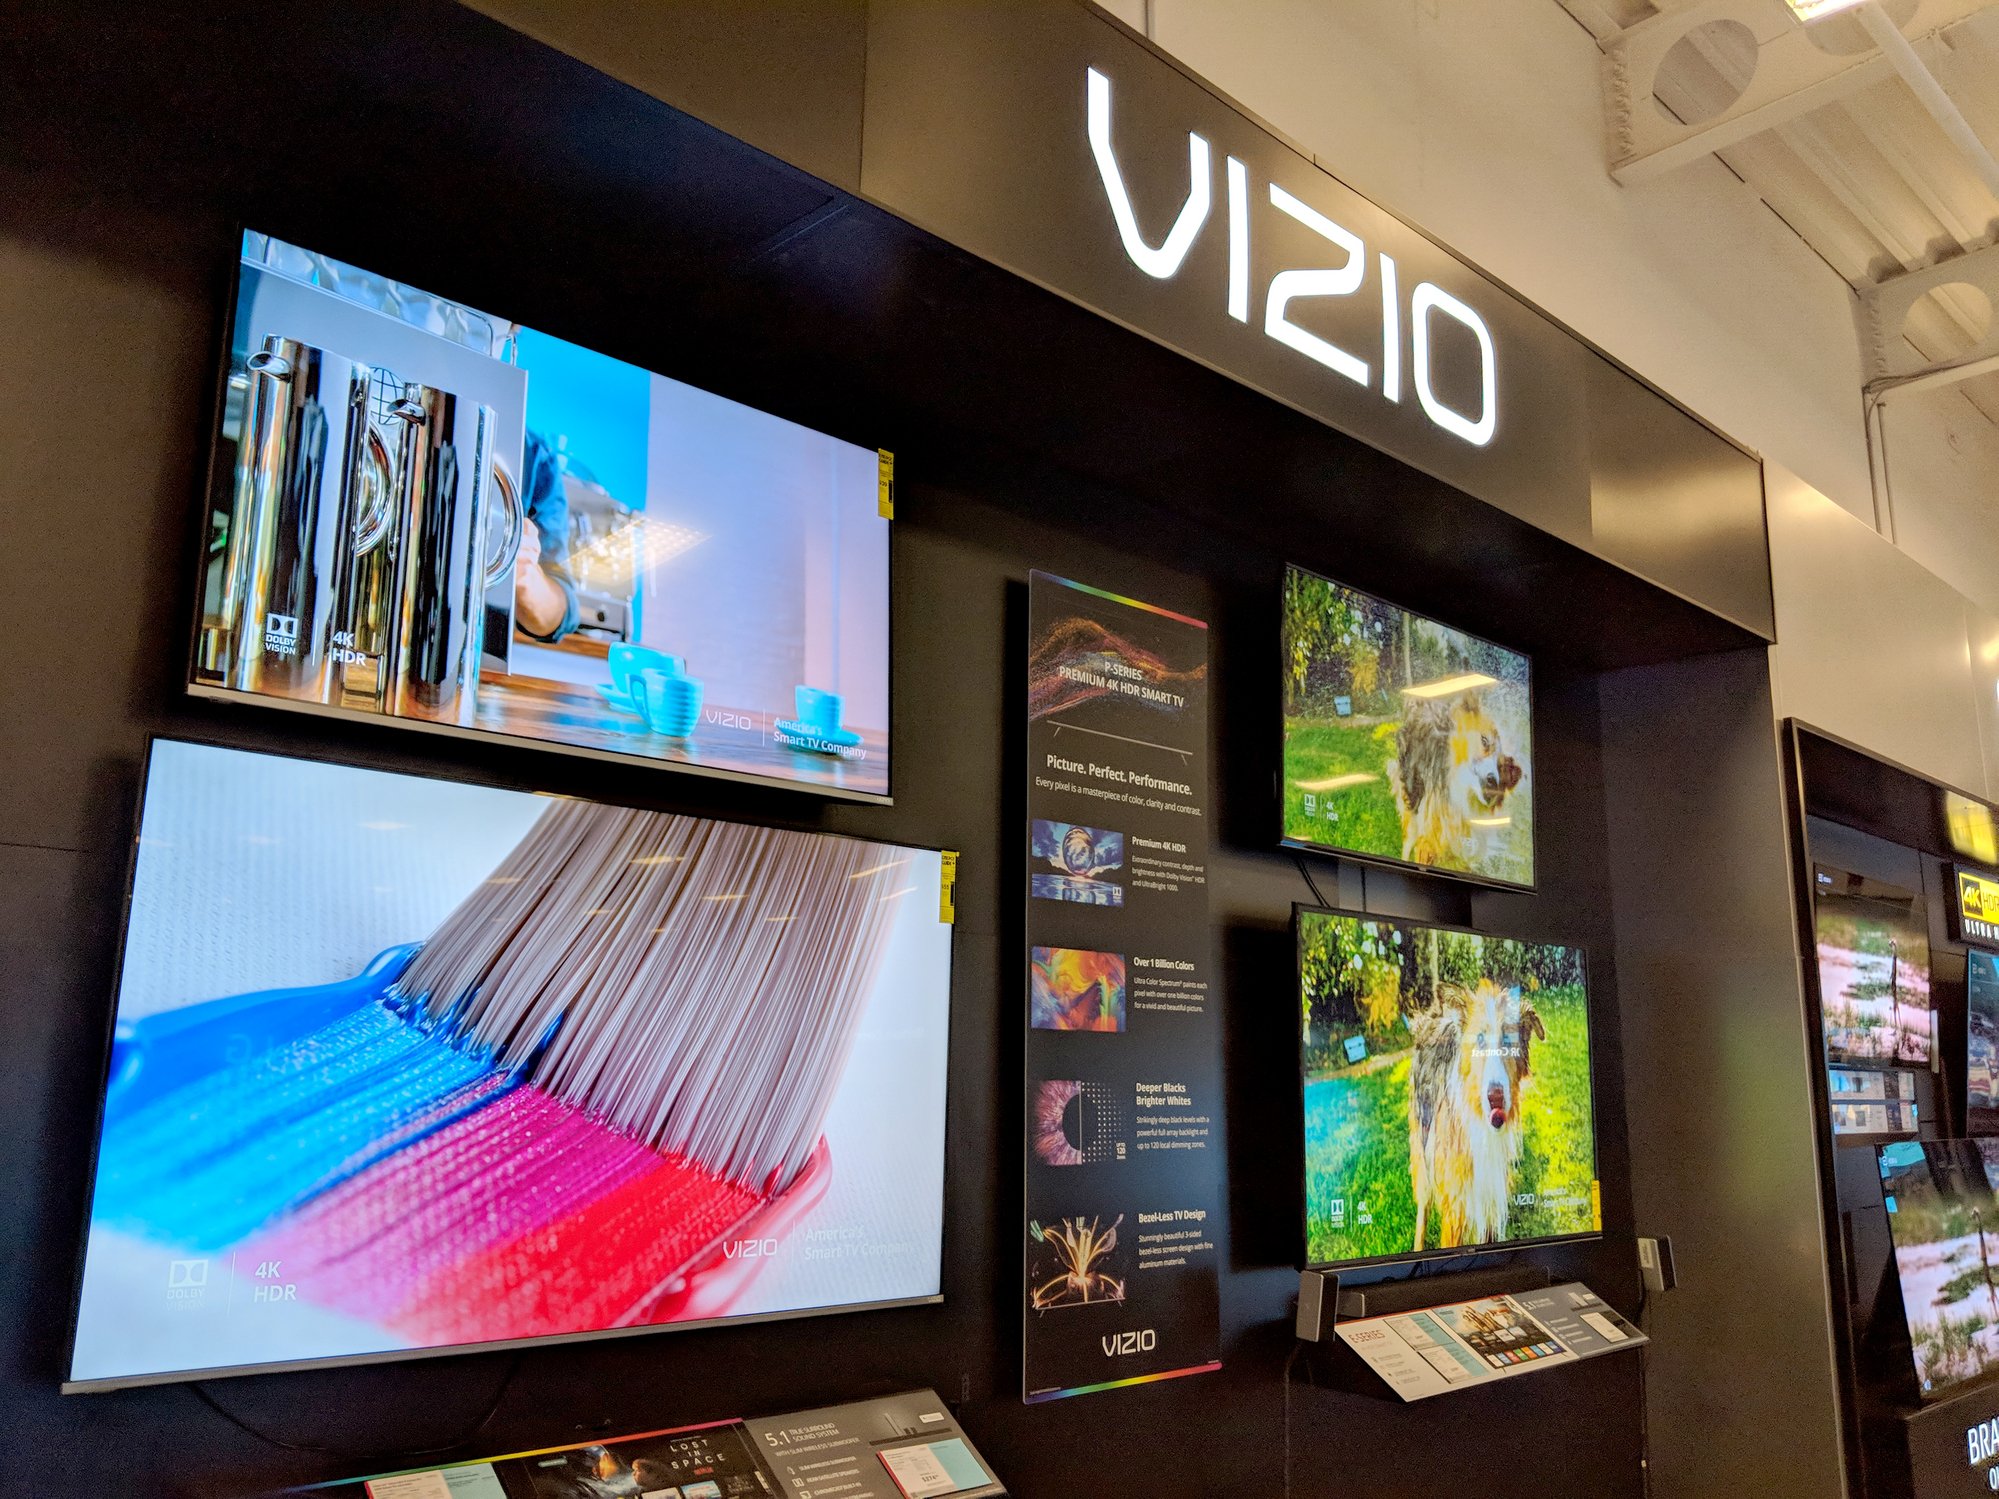 How To Easily Connect Laptop To Vizio Smart TV Wirelessly ...